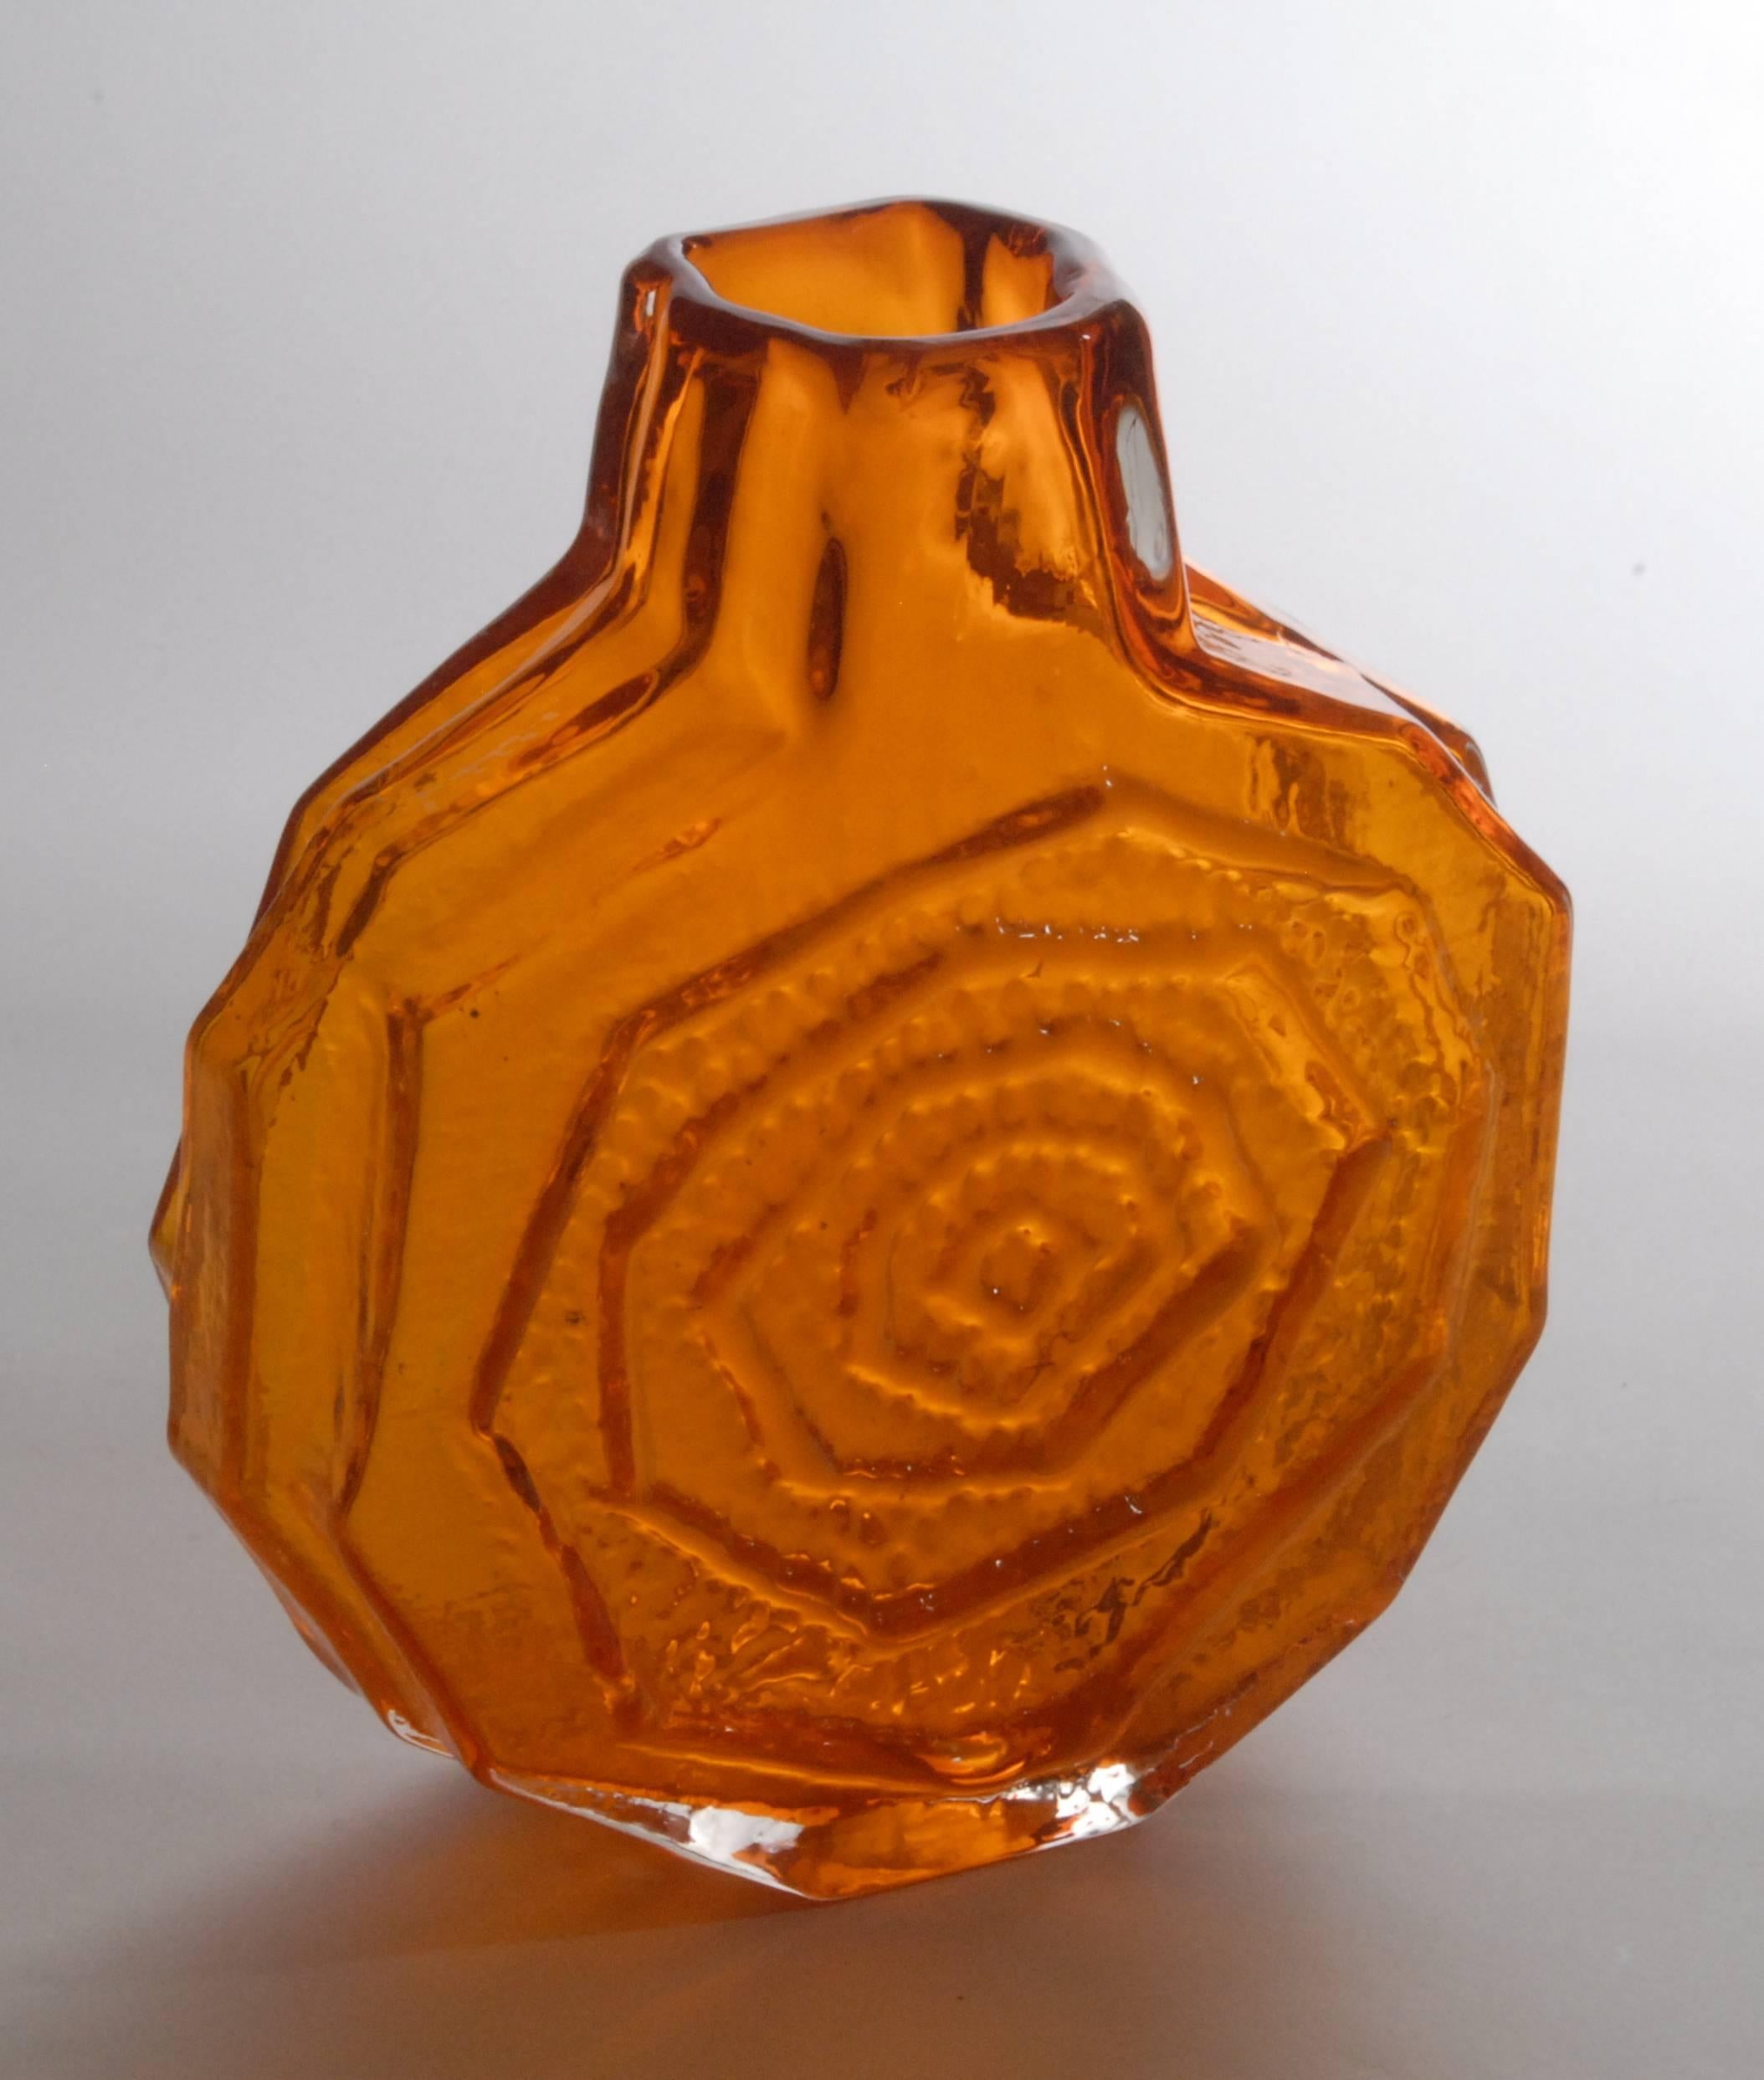 Whitefriars, London glassworks, Banjo vase designed by Geoffrey Baxter in the 'Textured' series. This is pattern number 9681. In production from 1966 until 1973 in nine colors. Tangerine was produced from November 1967 until March 1973, for a total